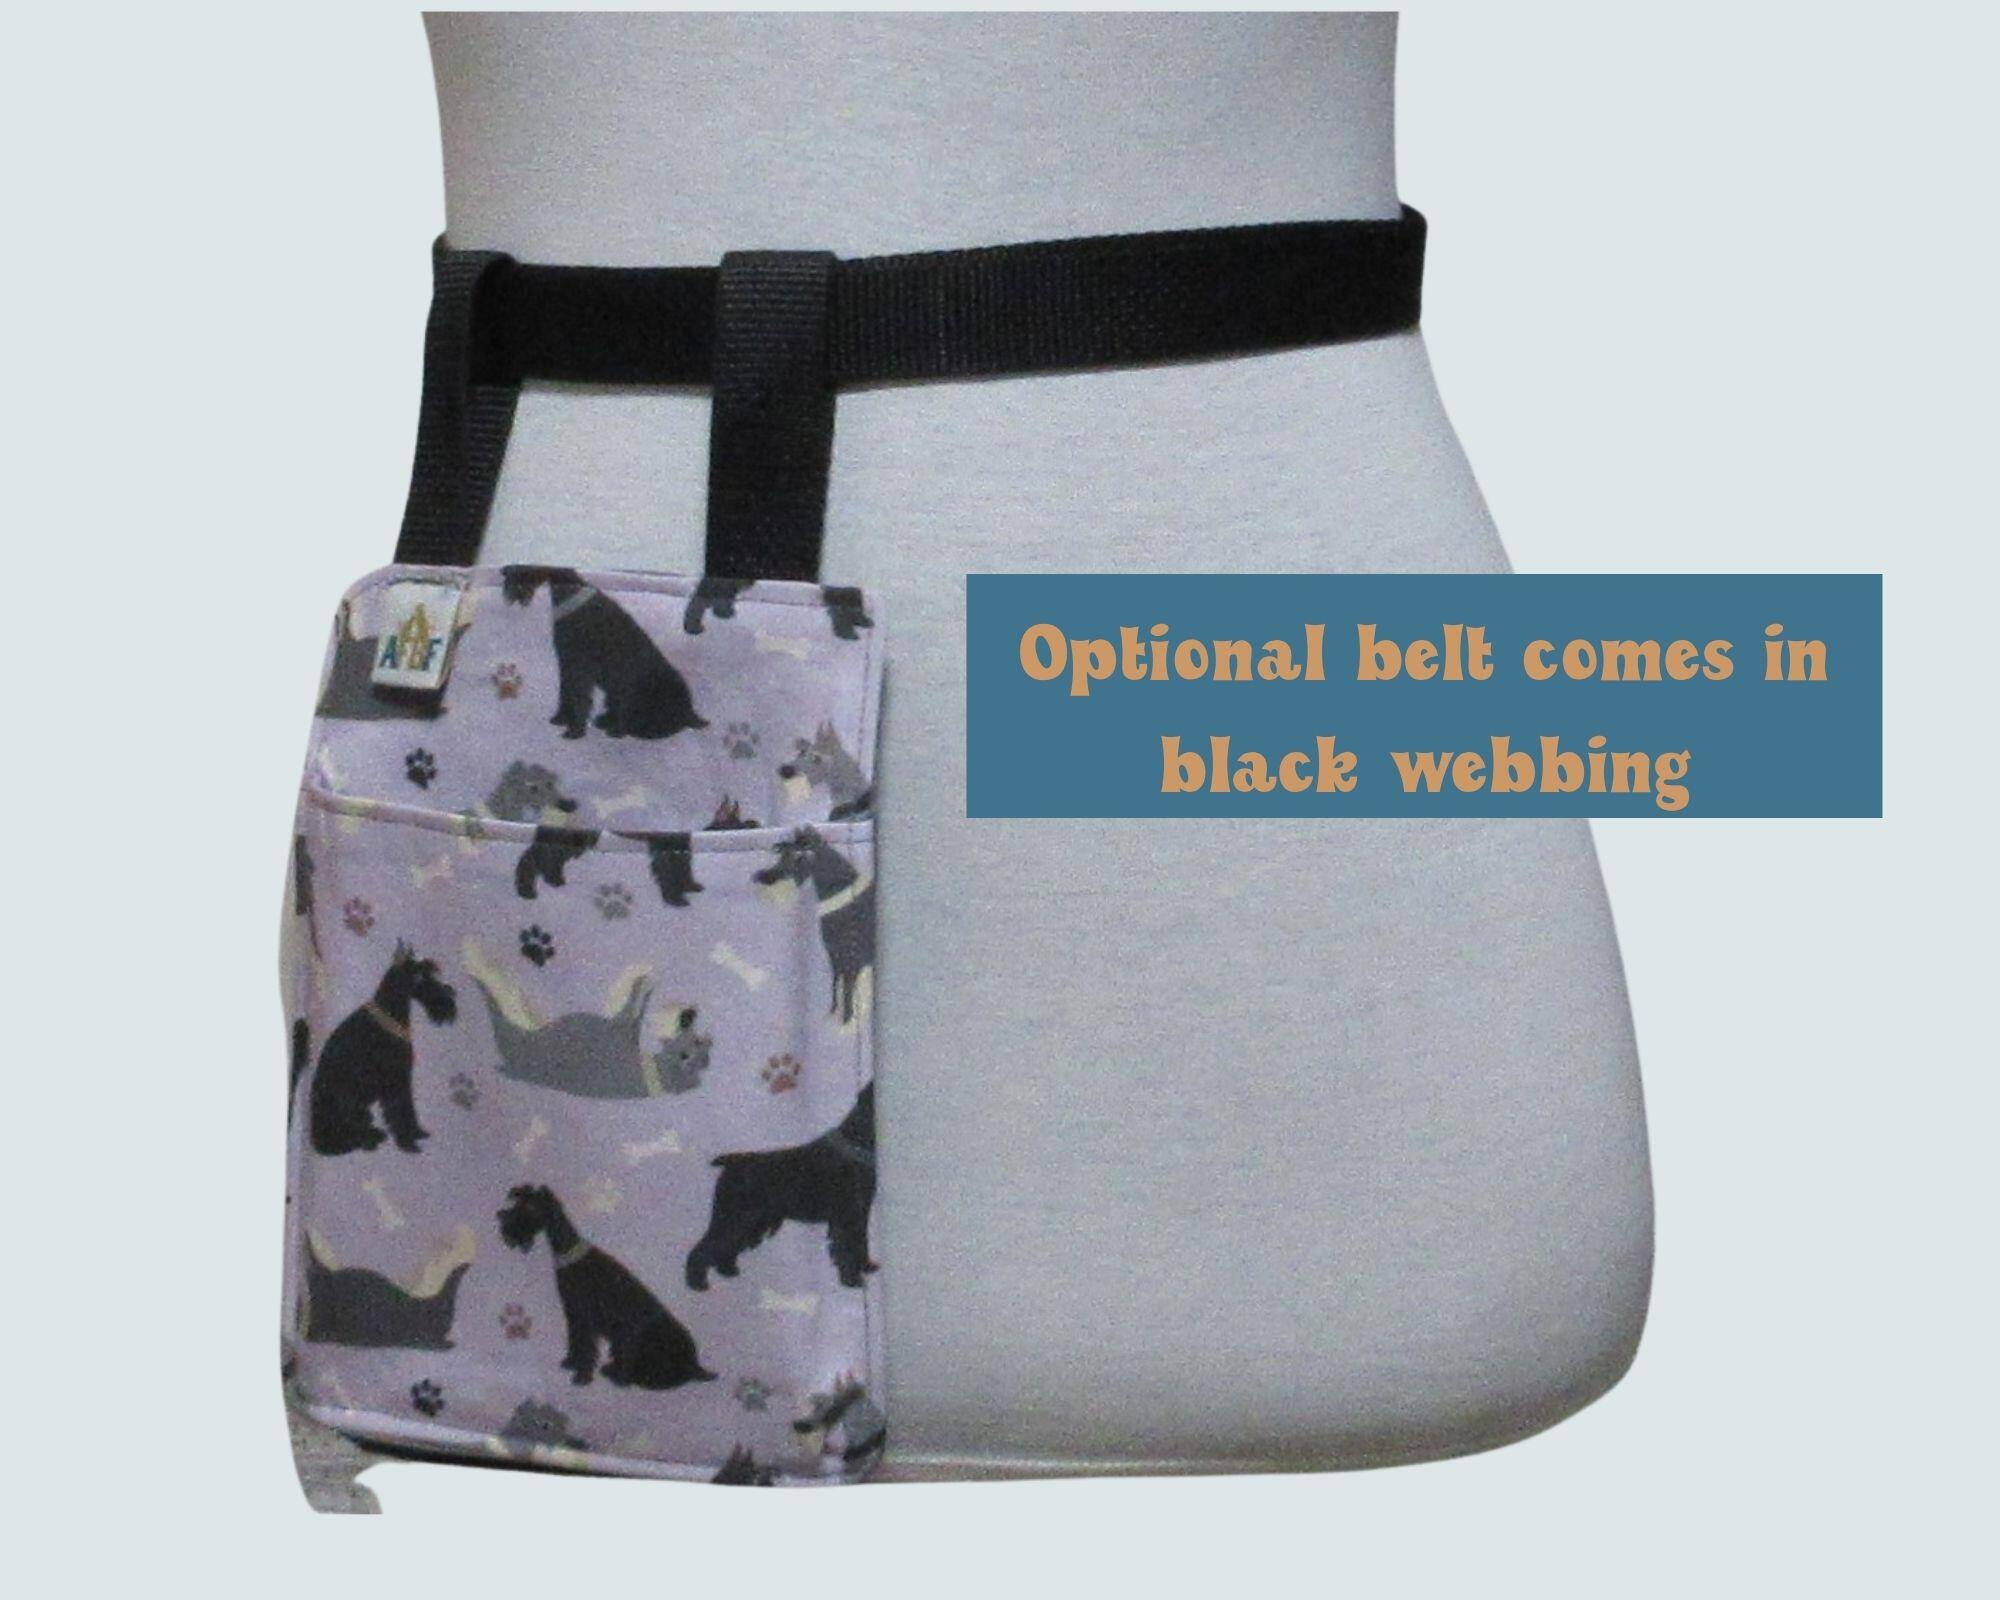 Schnauzer Training Treat bag, Large Treat Pouch in Black, Gray and Lilac, Great Schnauzer Dog Mom Gift